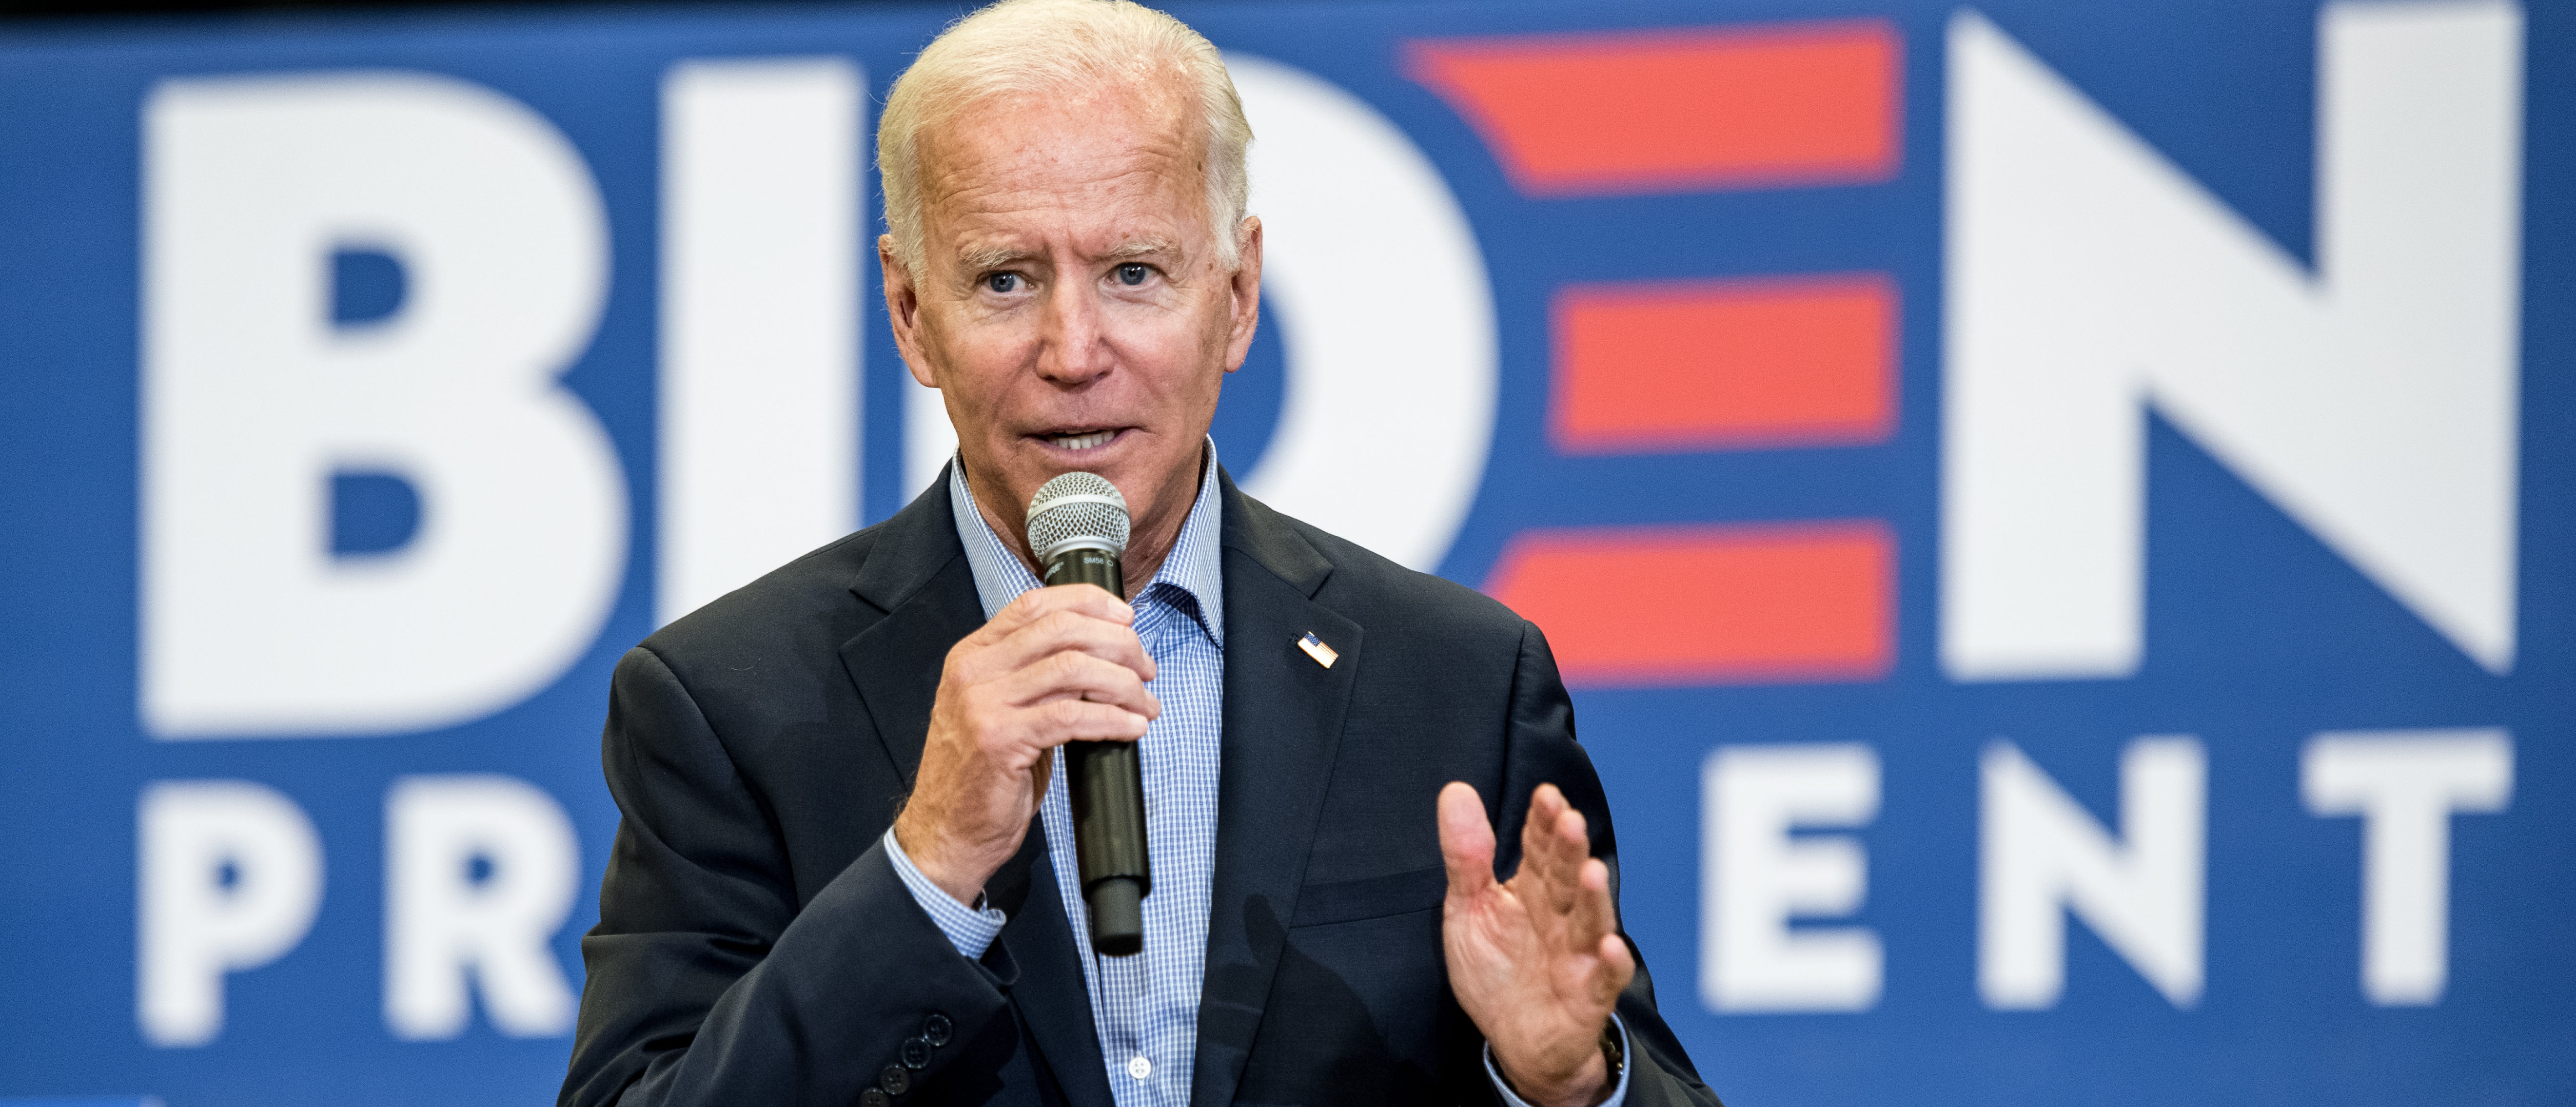 ROCK HILL, SC - AUGUST 29: Democratic presidential candidate and former US Vice President Joe Biden addresses a crowd at a town hall event at Clinton College on August 29, 2019 in Rock Hill, South Carolina. Biden spent Wednesday and Thursday campaigning in the early primary state. (Photo by Sean Rayford/Getty Images)